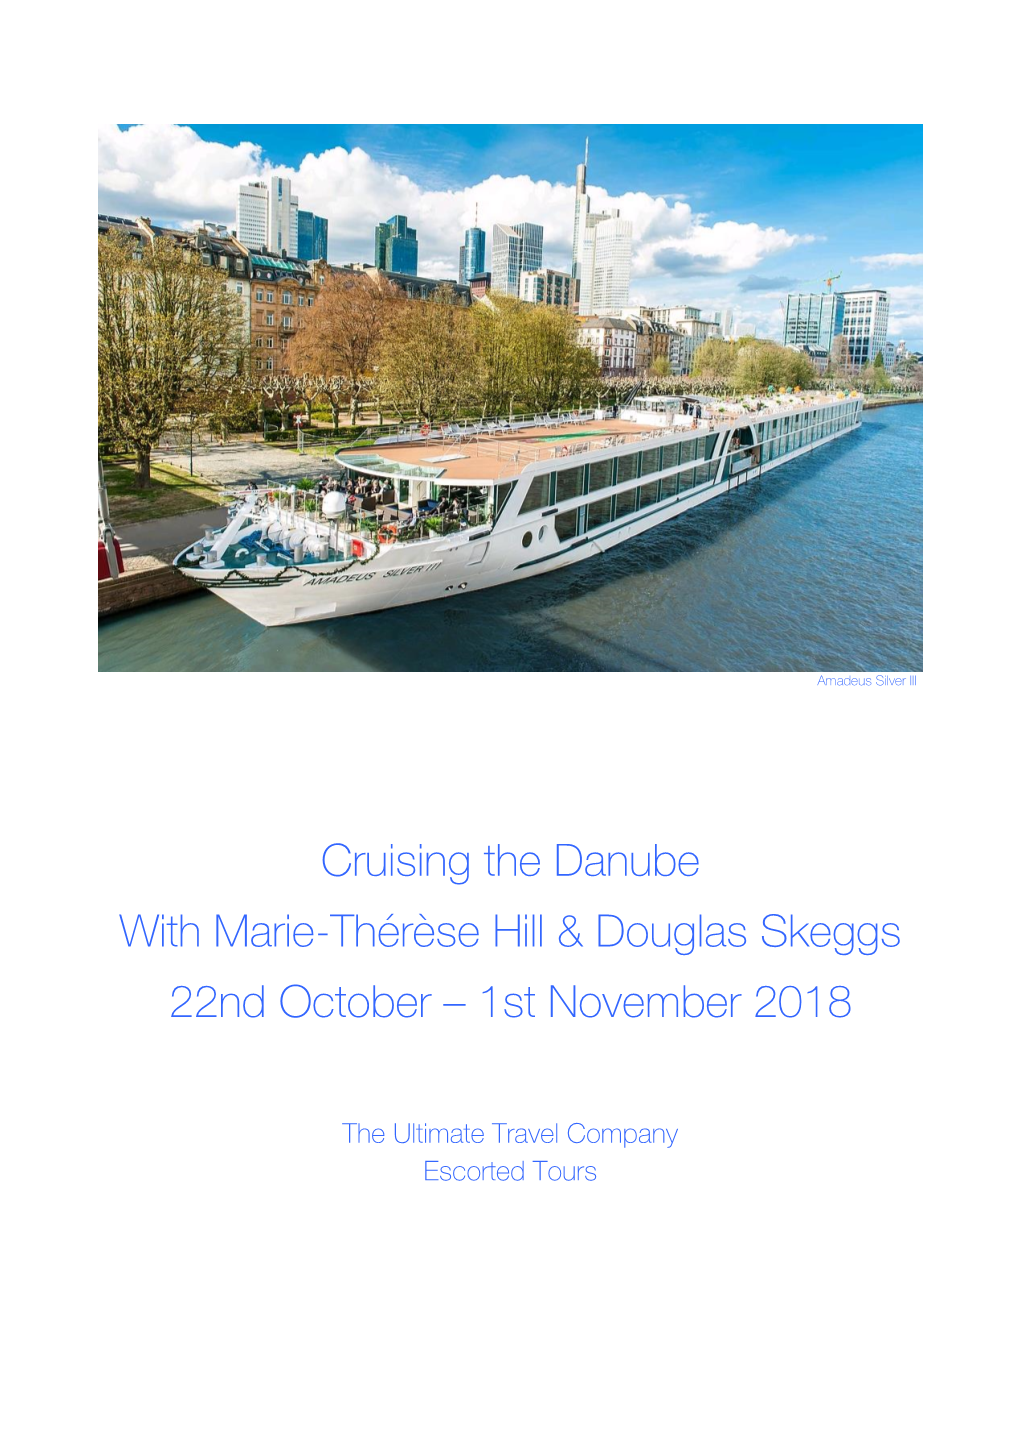 Cruising the Danube with Marie-Thérèse Hill & Douglas